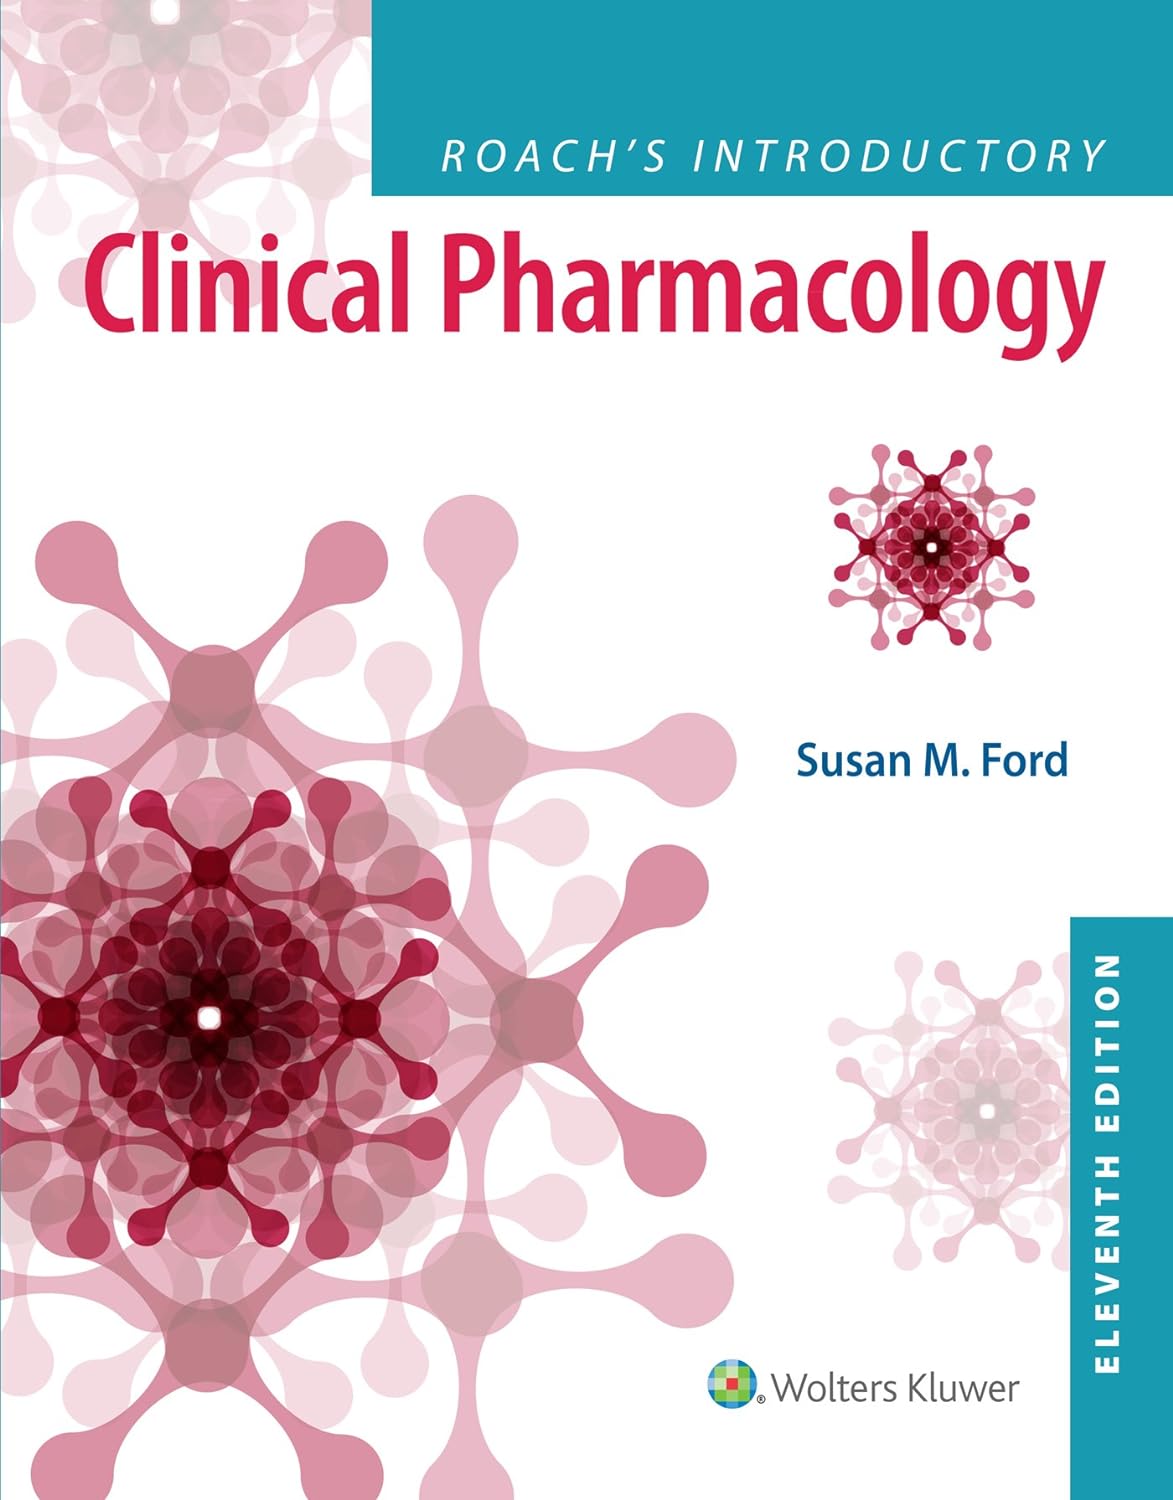 practice test questions (test bank)for Roach's Introductory Clinical Pharmacology